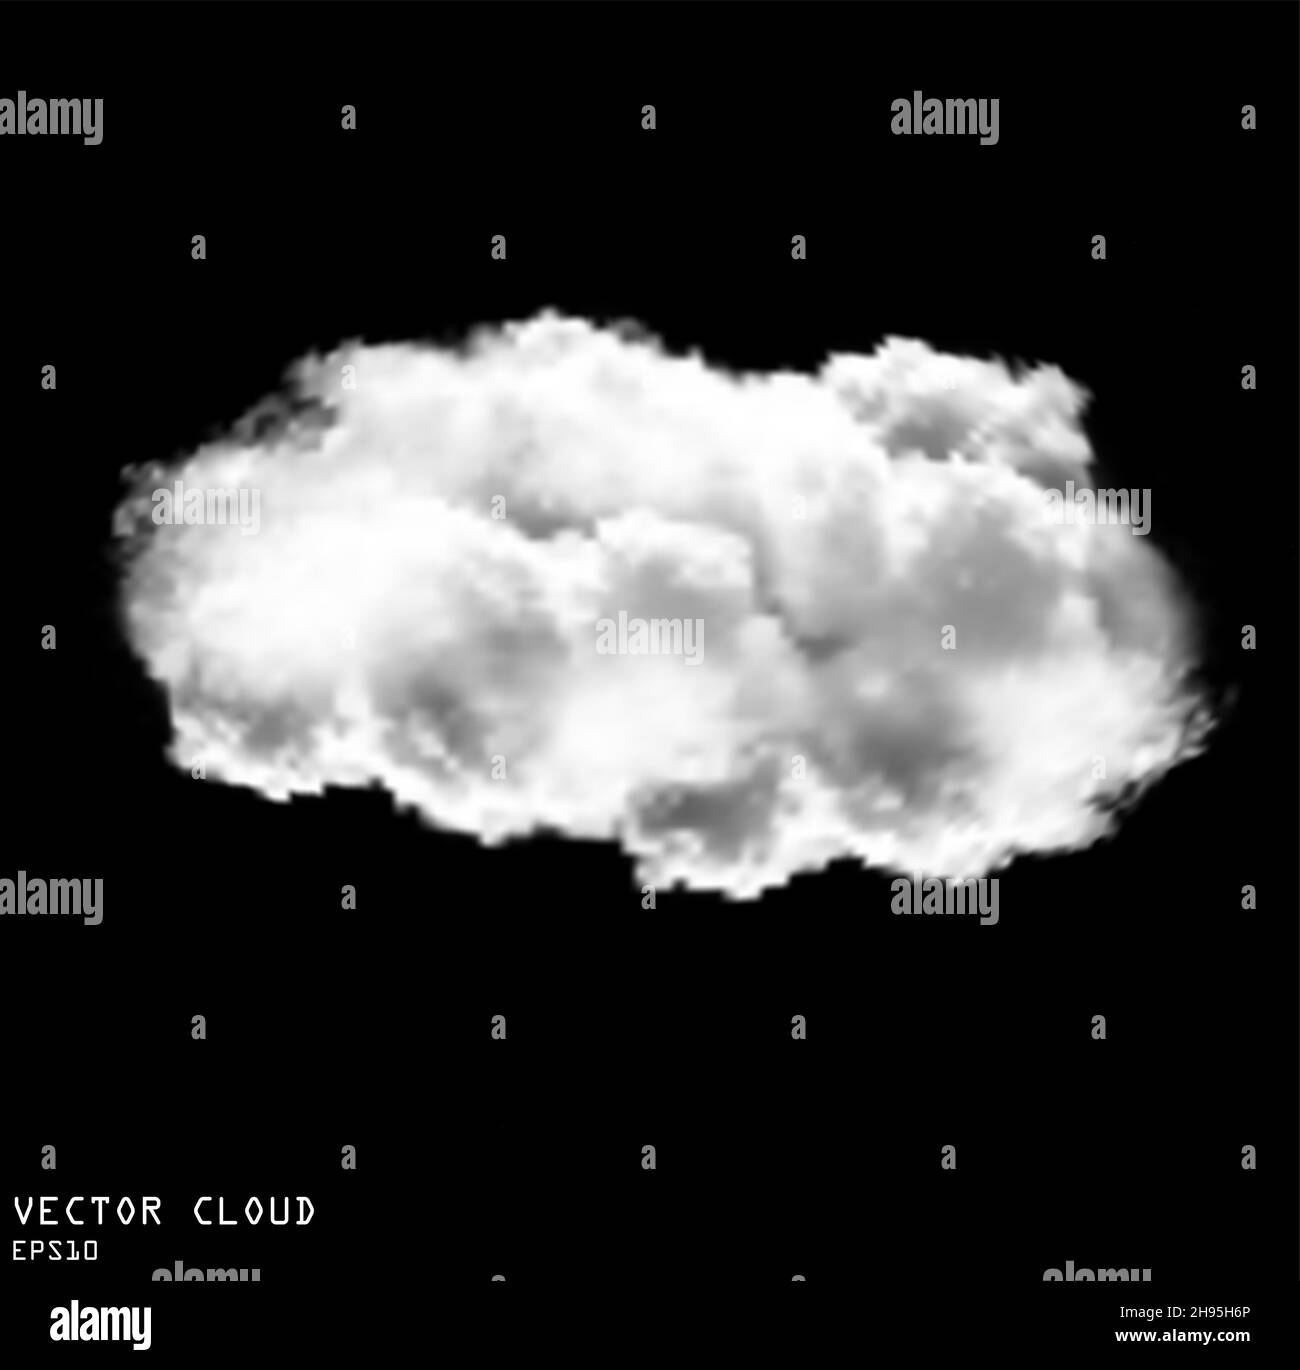 Clouds vector realistic cloud shape illustration, white fluffy cloud isolated over solid black background Stock Vector